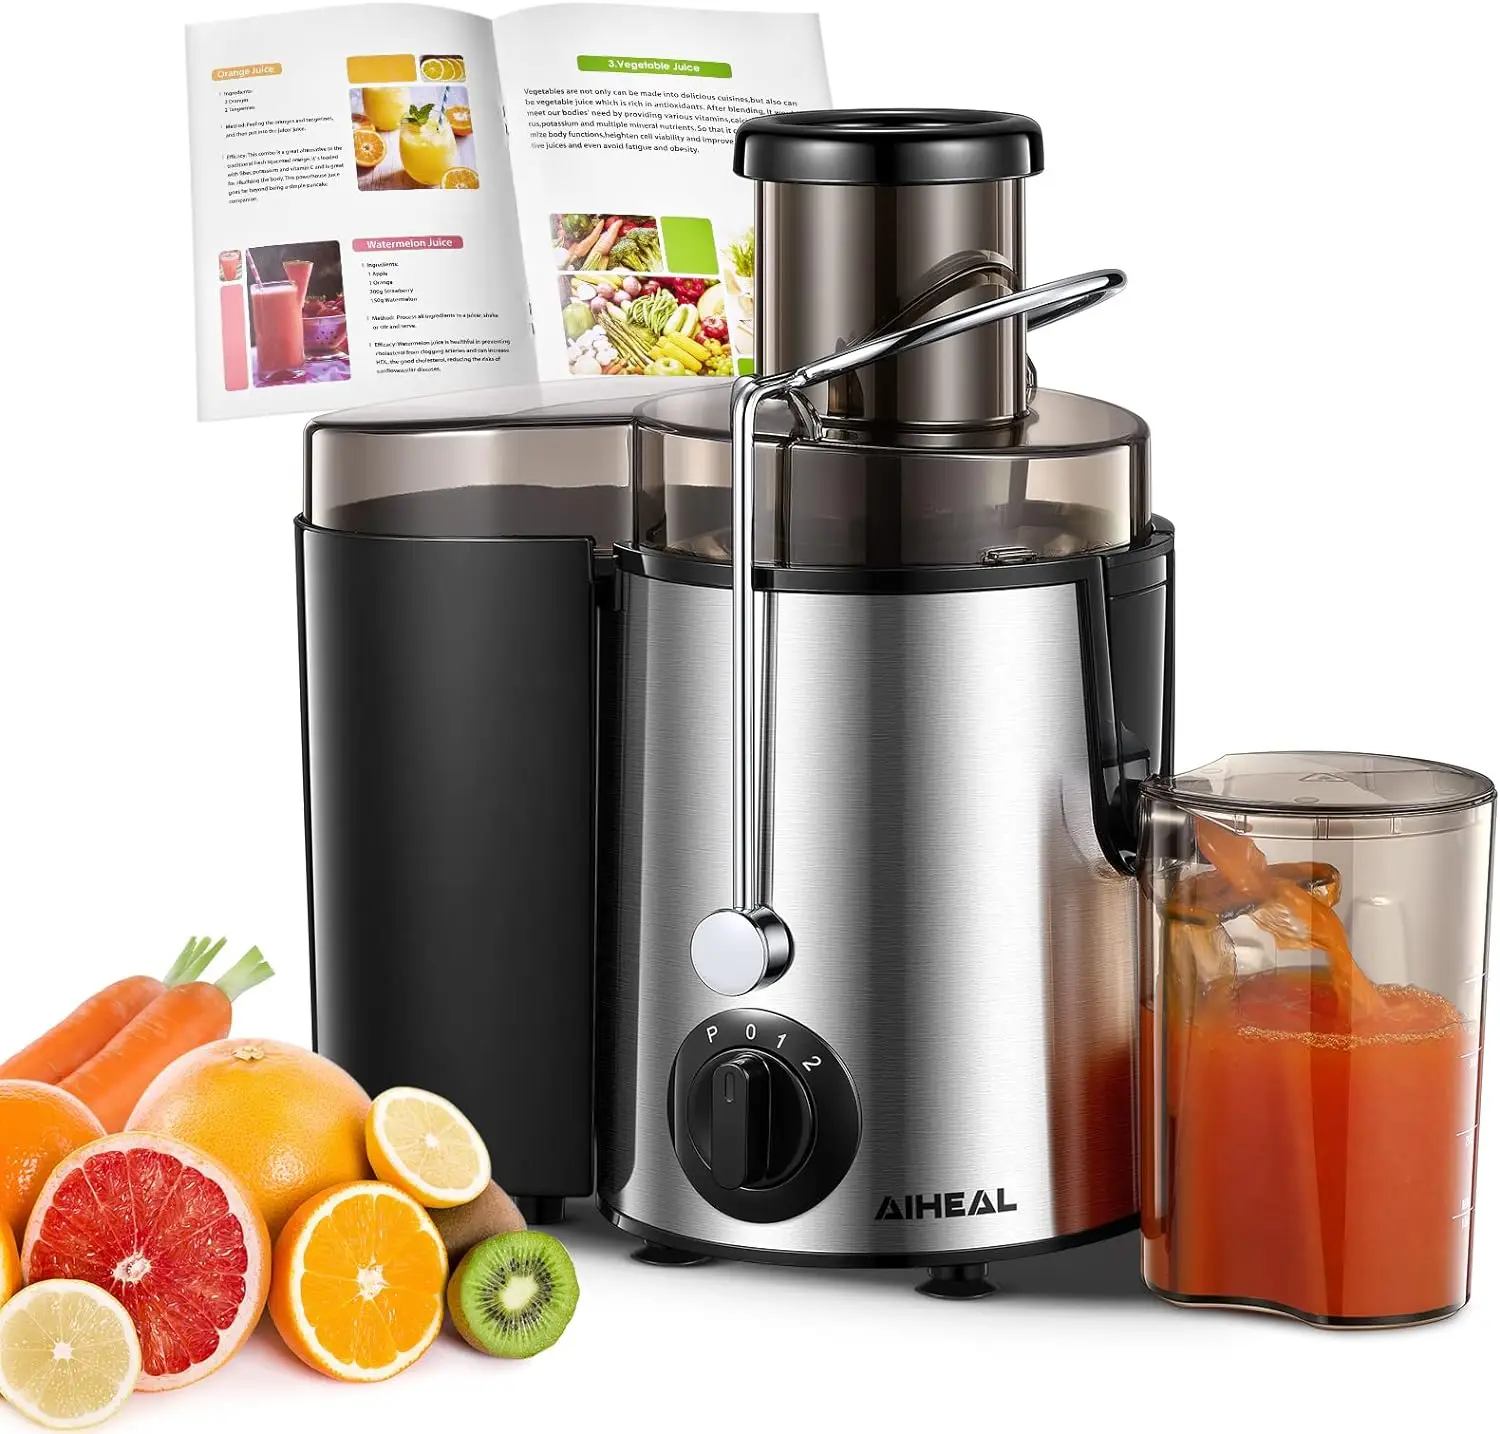 

Machines, AIHEAL Juicer Vegetable and Fruit Easy to Clean, Centrifugal Juicer with 3 Speed Control, Upgraded 400W Motor, Cleanin